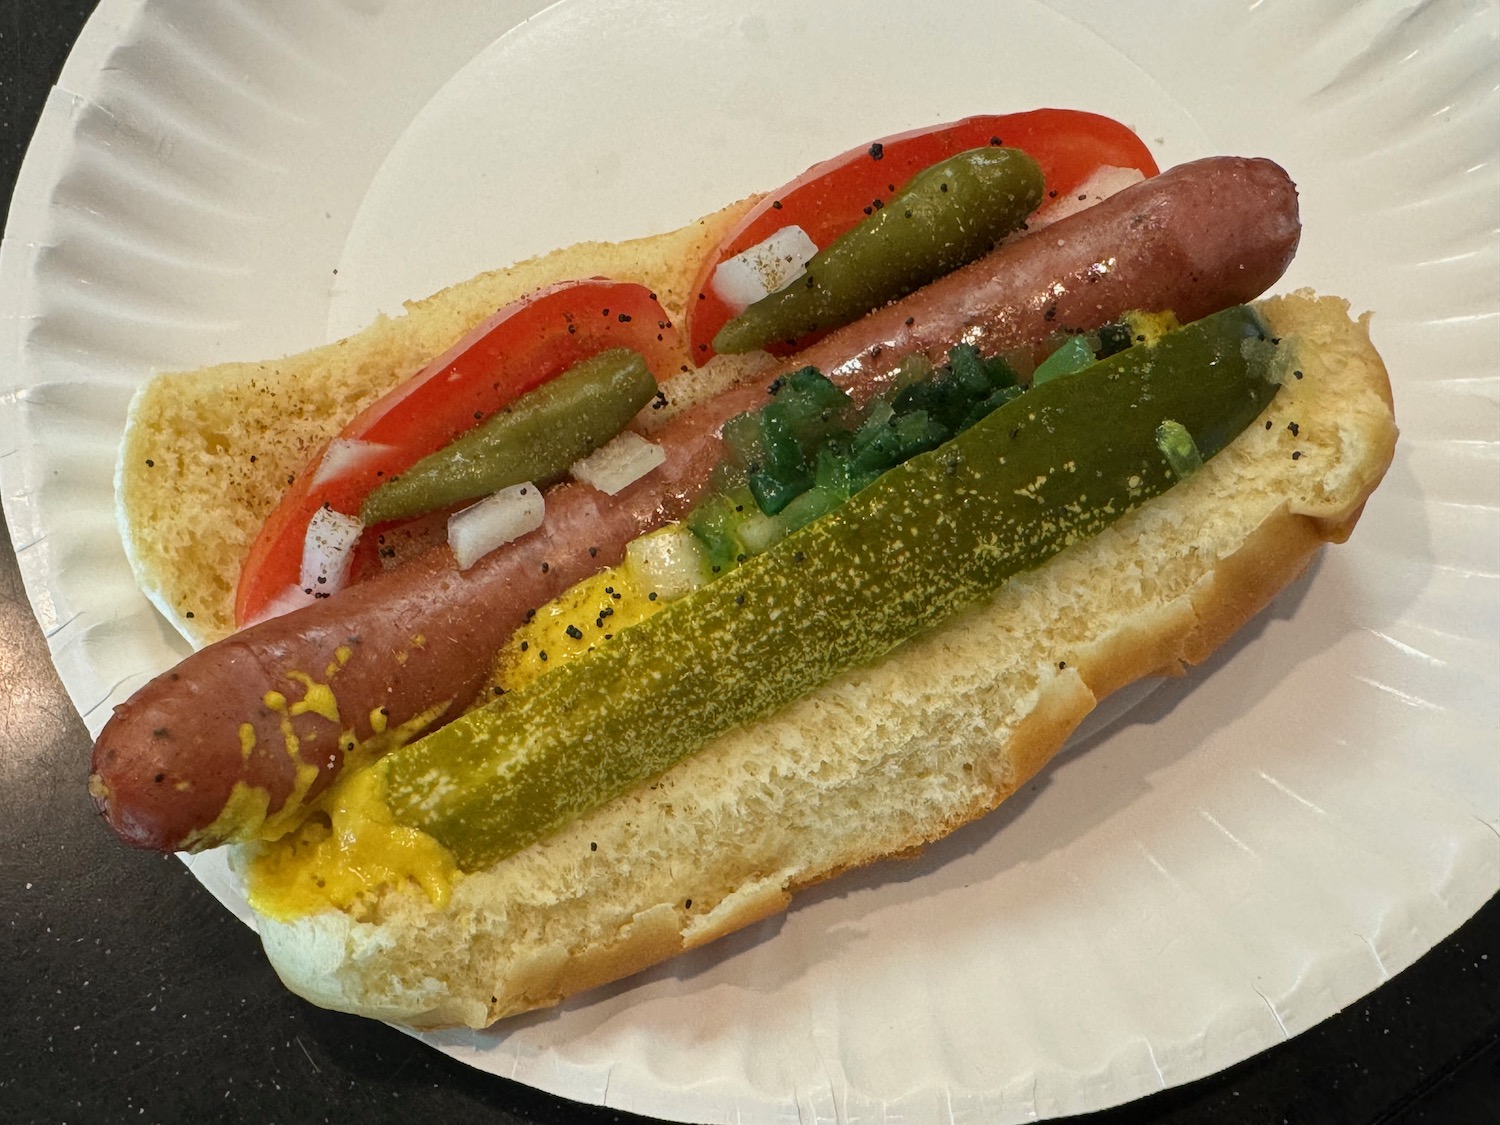 a hot dog with pickles and mustard on a paper plate